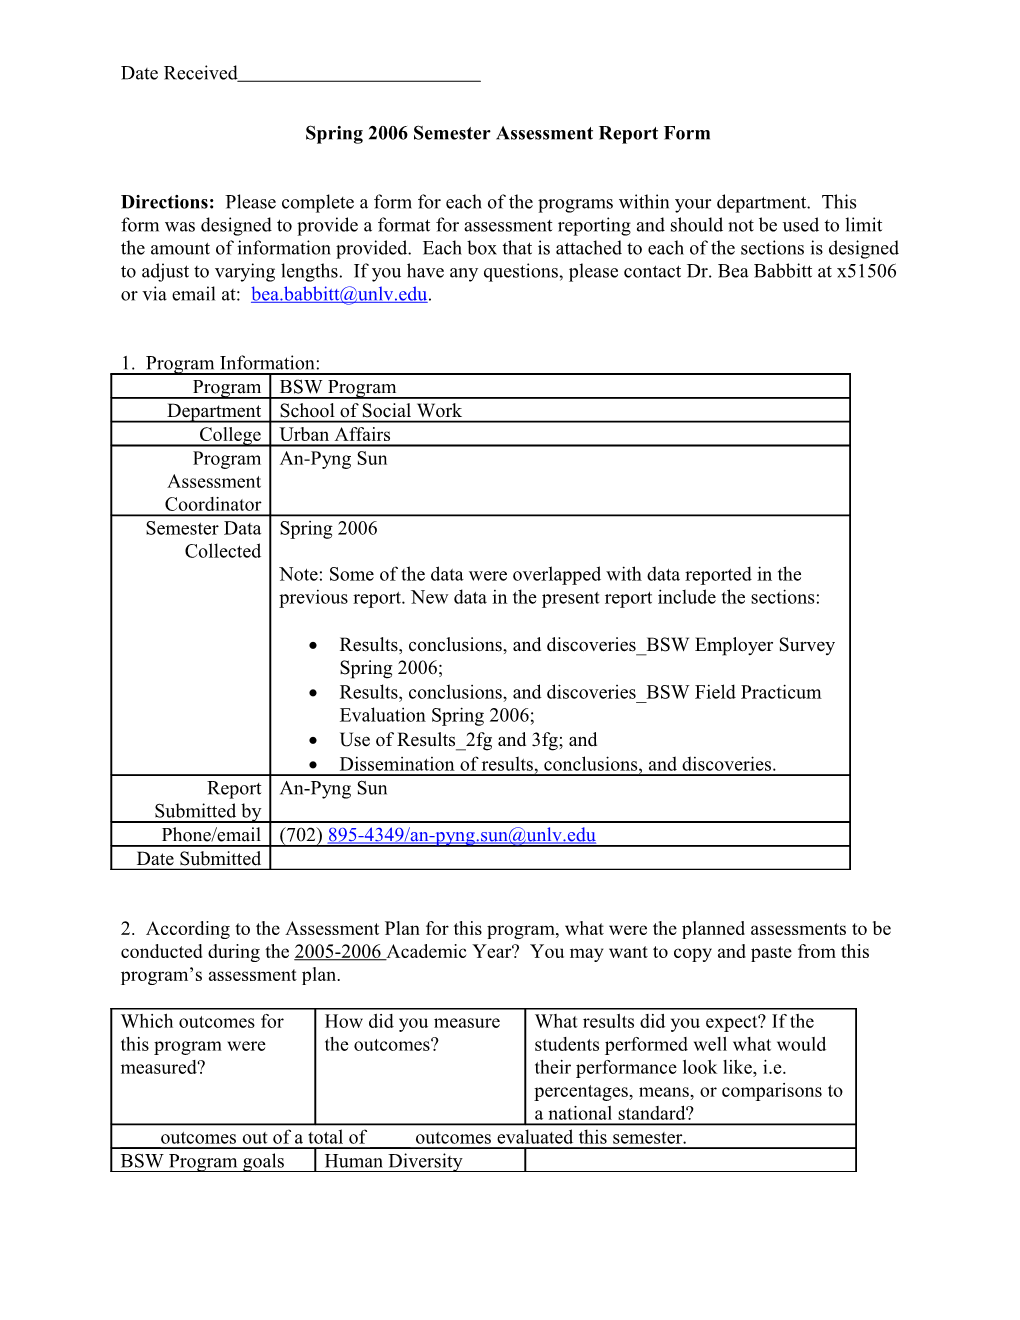 Annual Assessment Report Form for Student Learning Outcomes Assessment s3